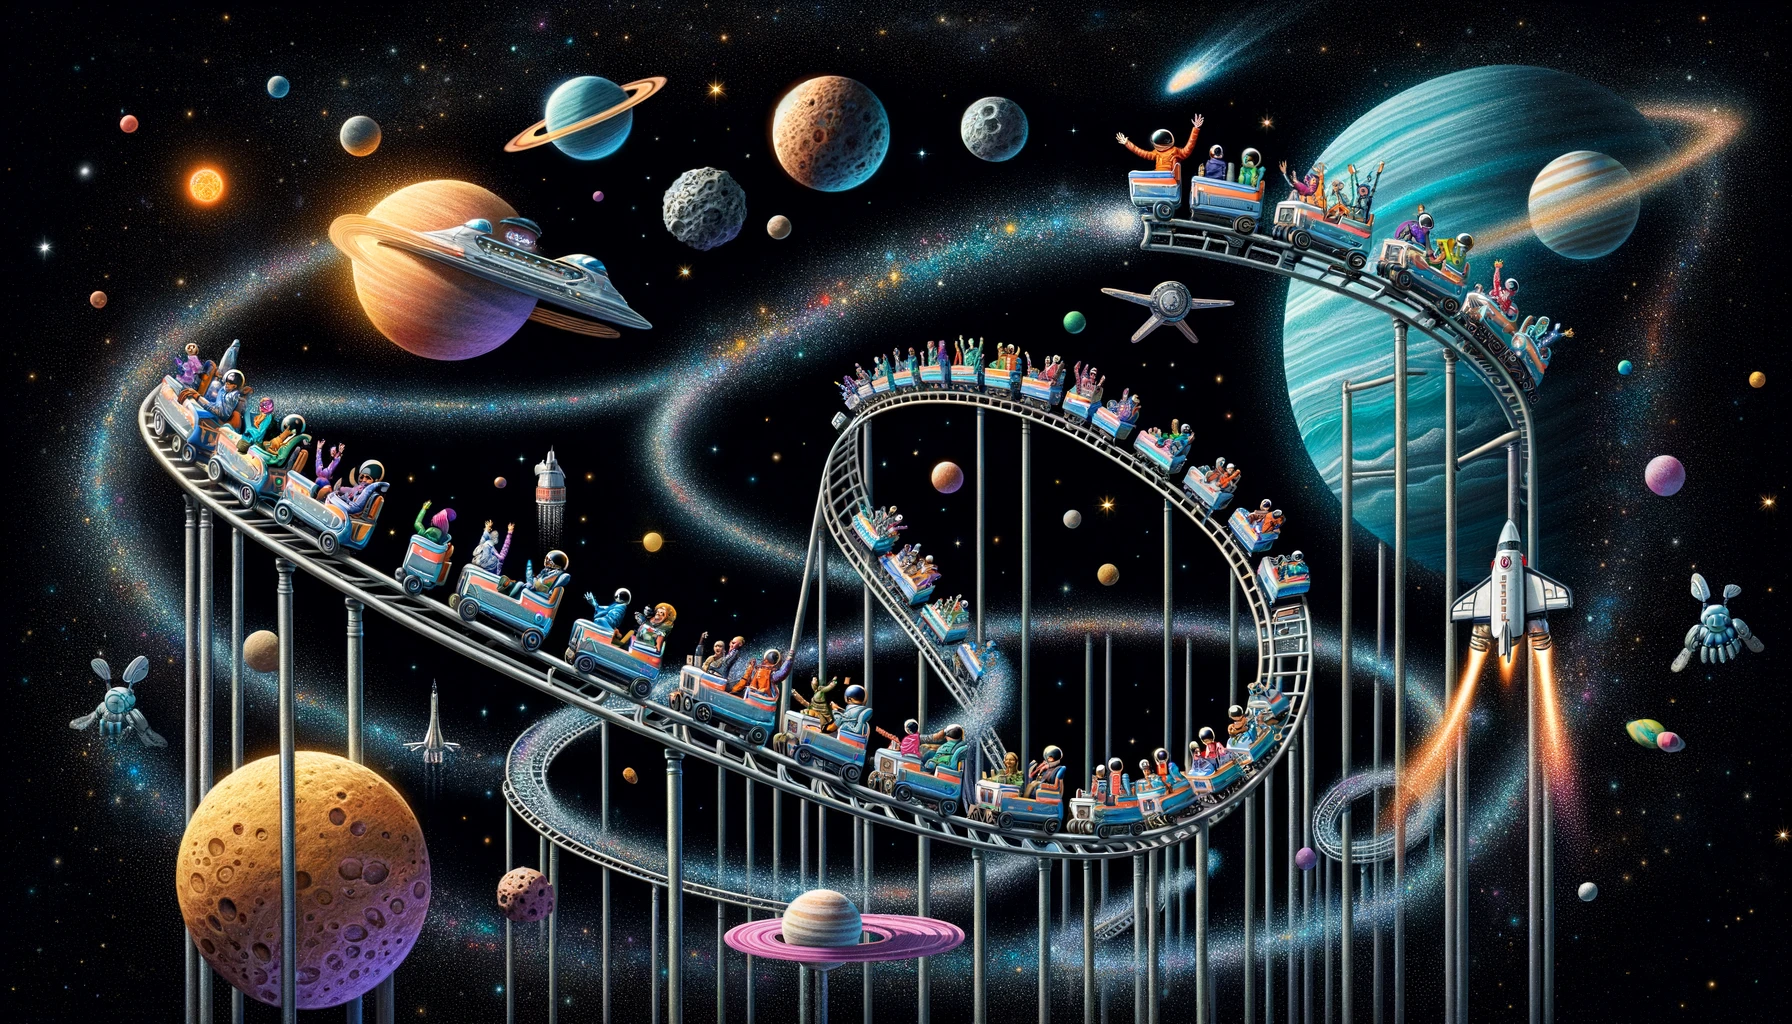 The roller coaster in space is truly out of this world! - Roller Coaster Pun